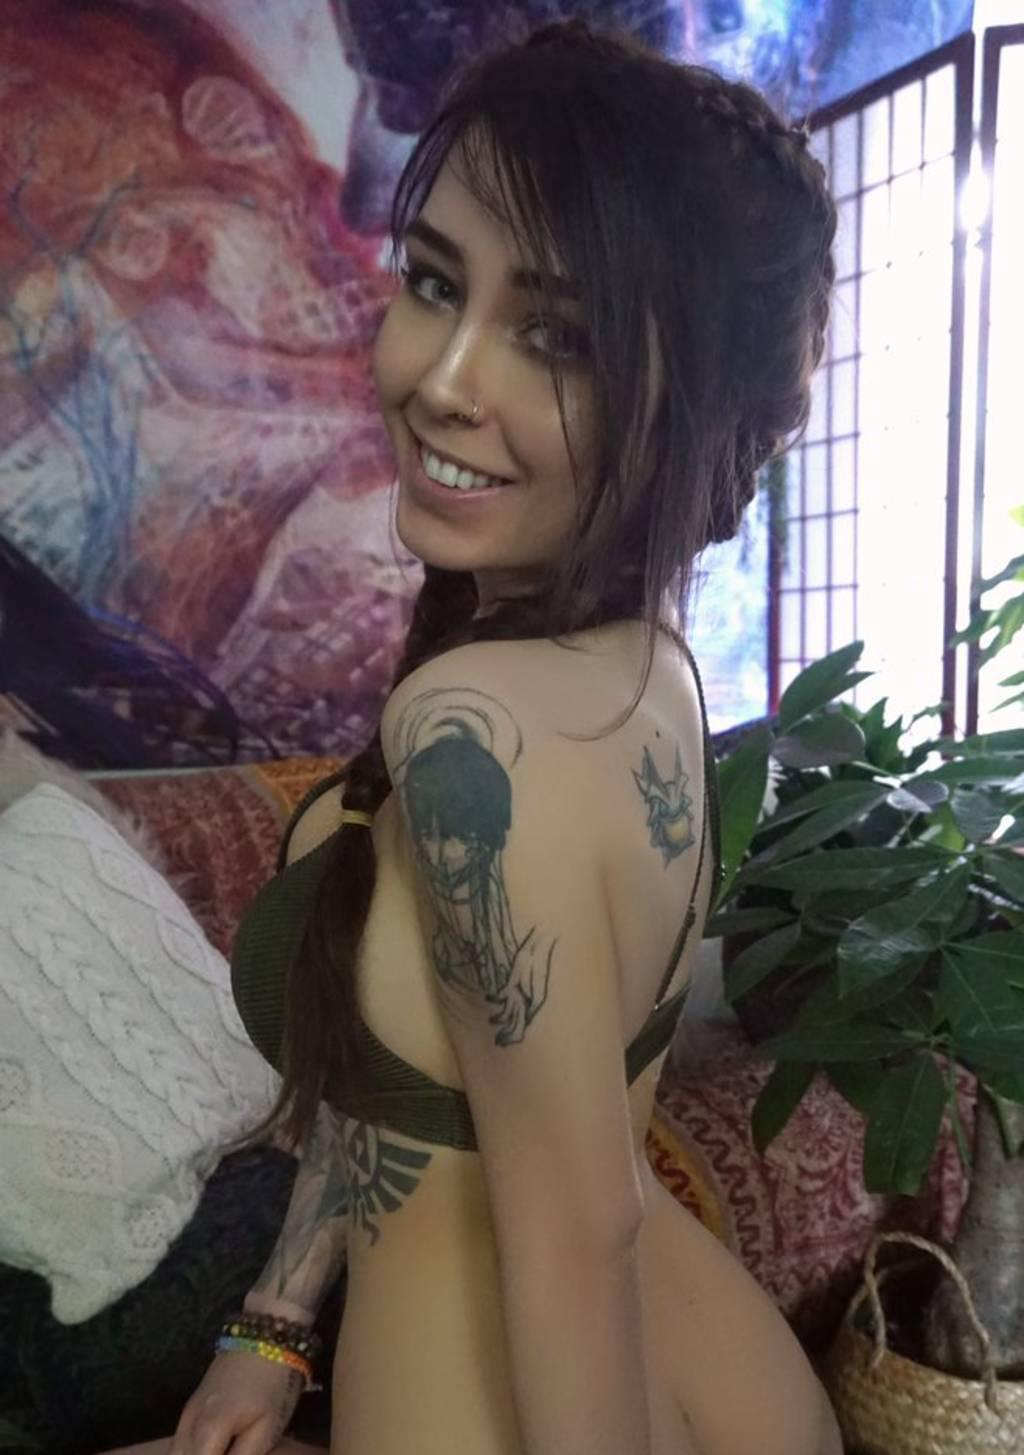 tattoo’d princess cosplay babe holiday $pcls norules